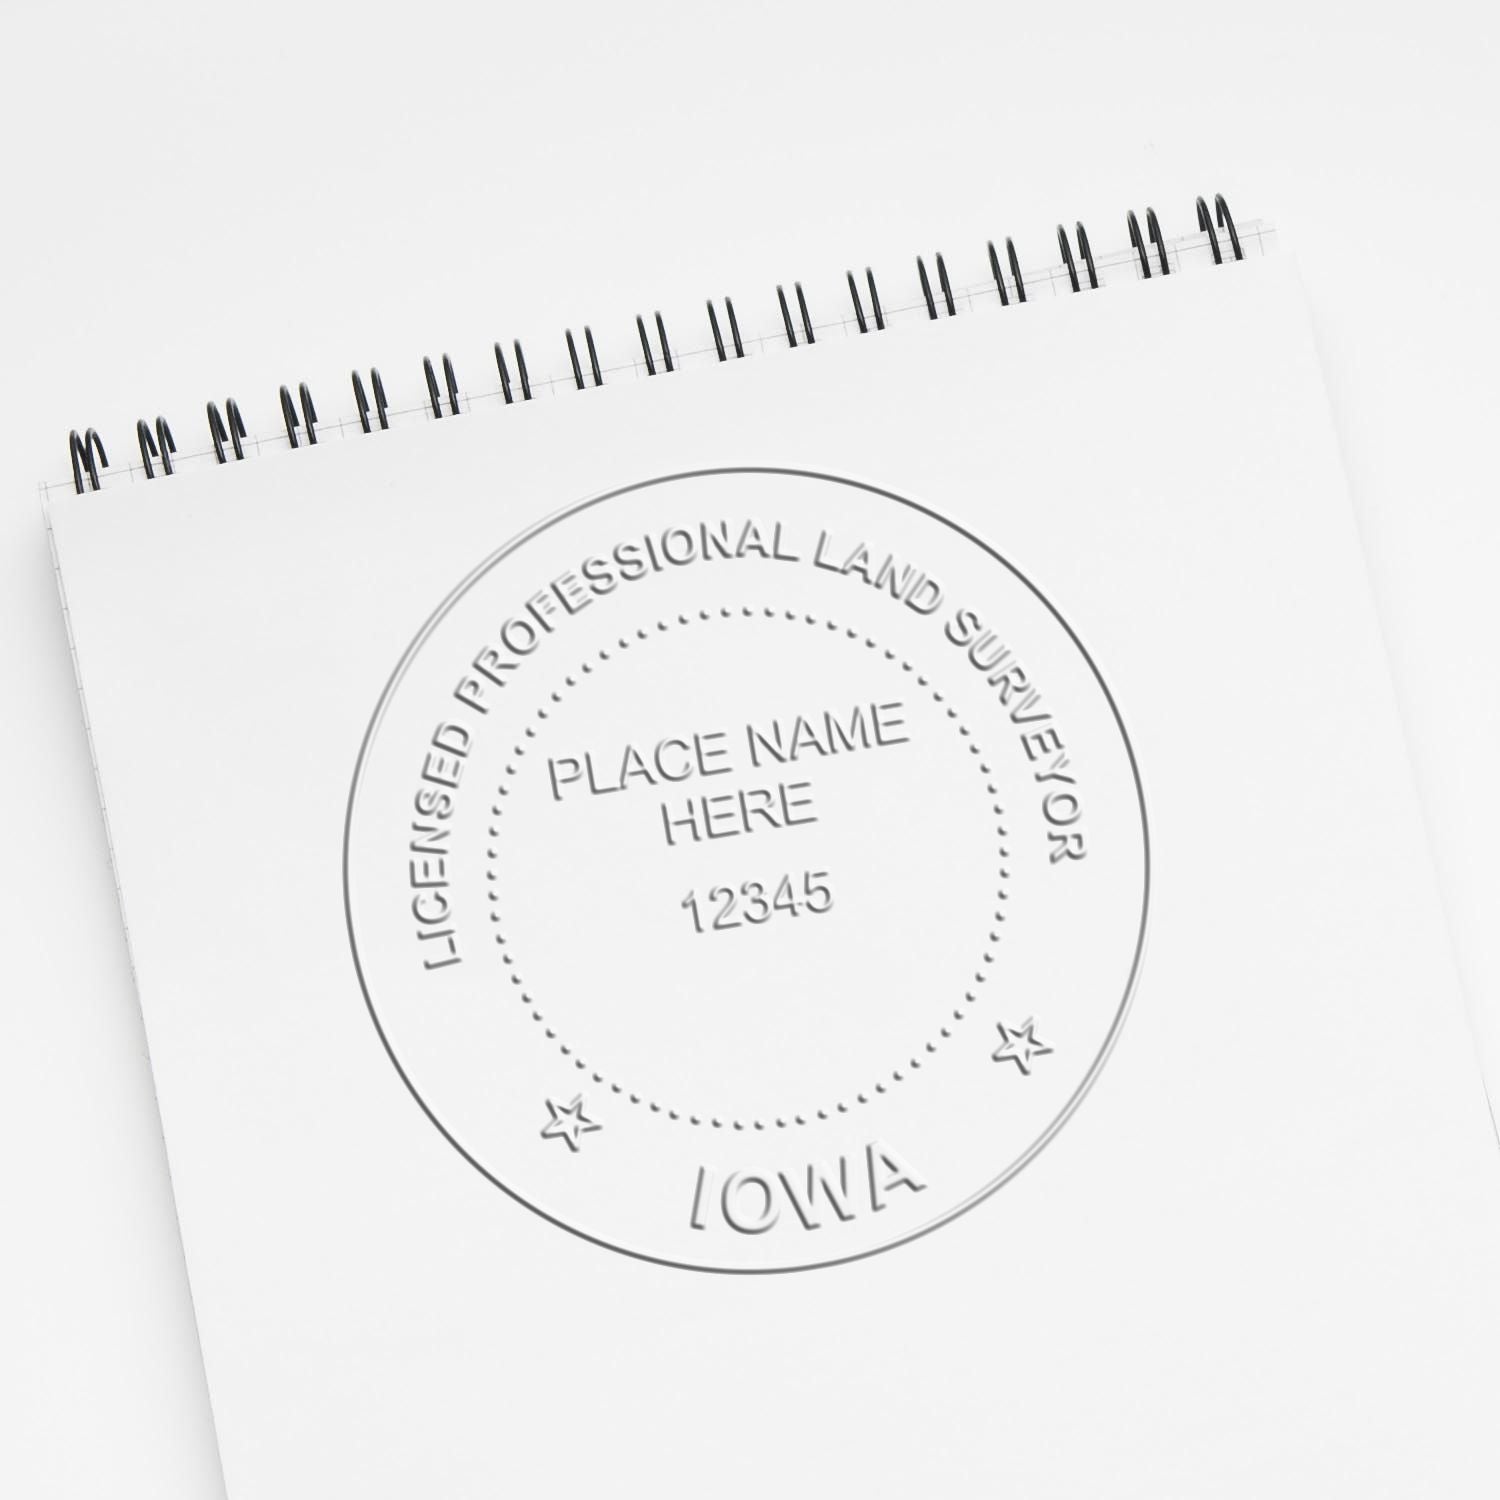 An alternative view of the Hybrid Iowa Land Surveyor Seal stamped on a sheet of paper showing the image in use